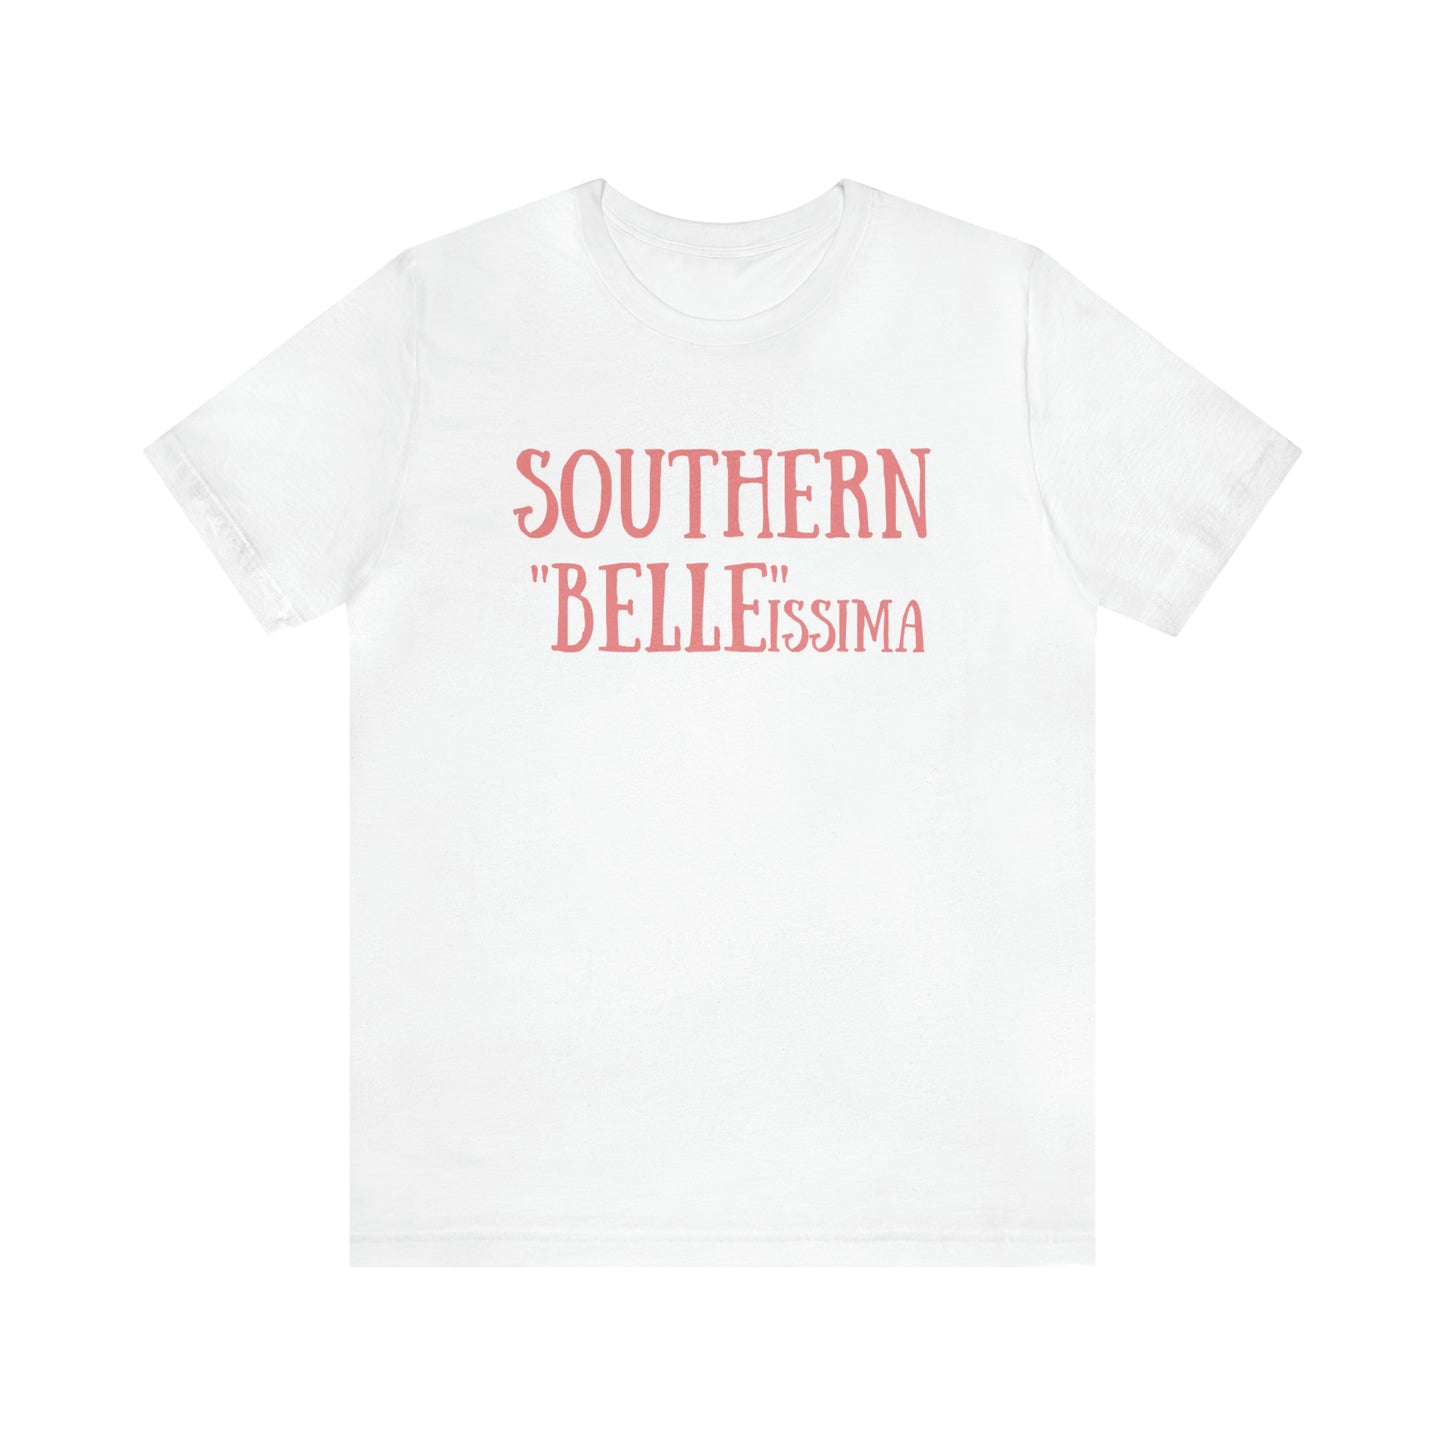 Southern "Belle"issima T-Shirt - Nude Lipstick